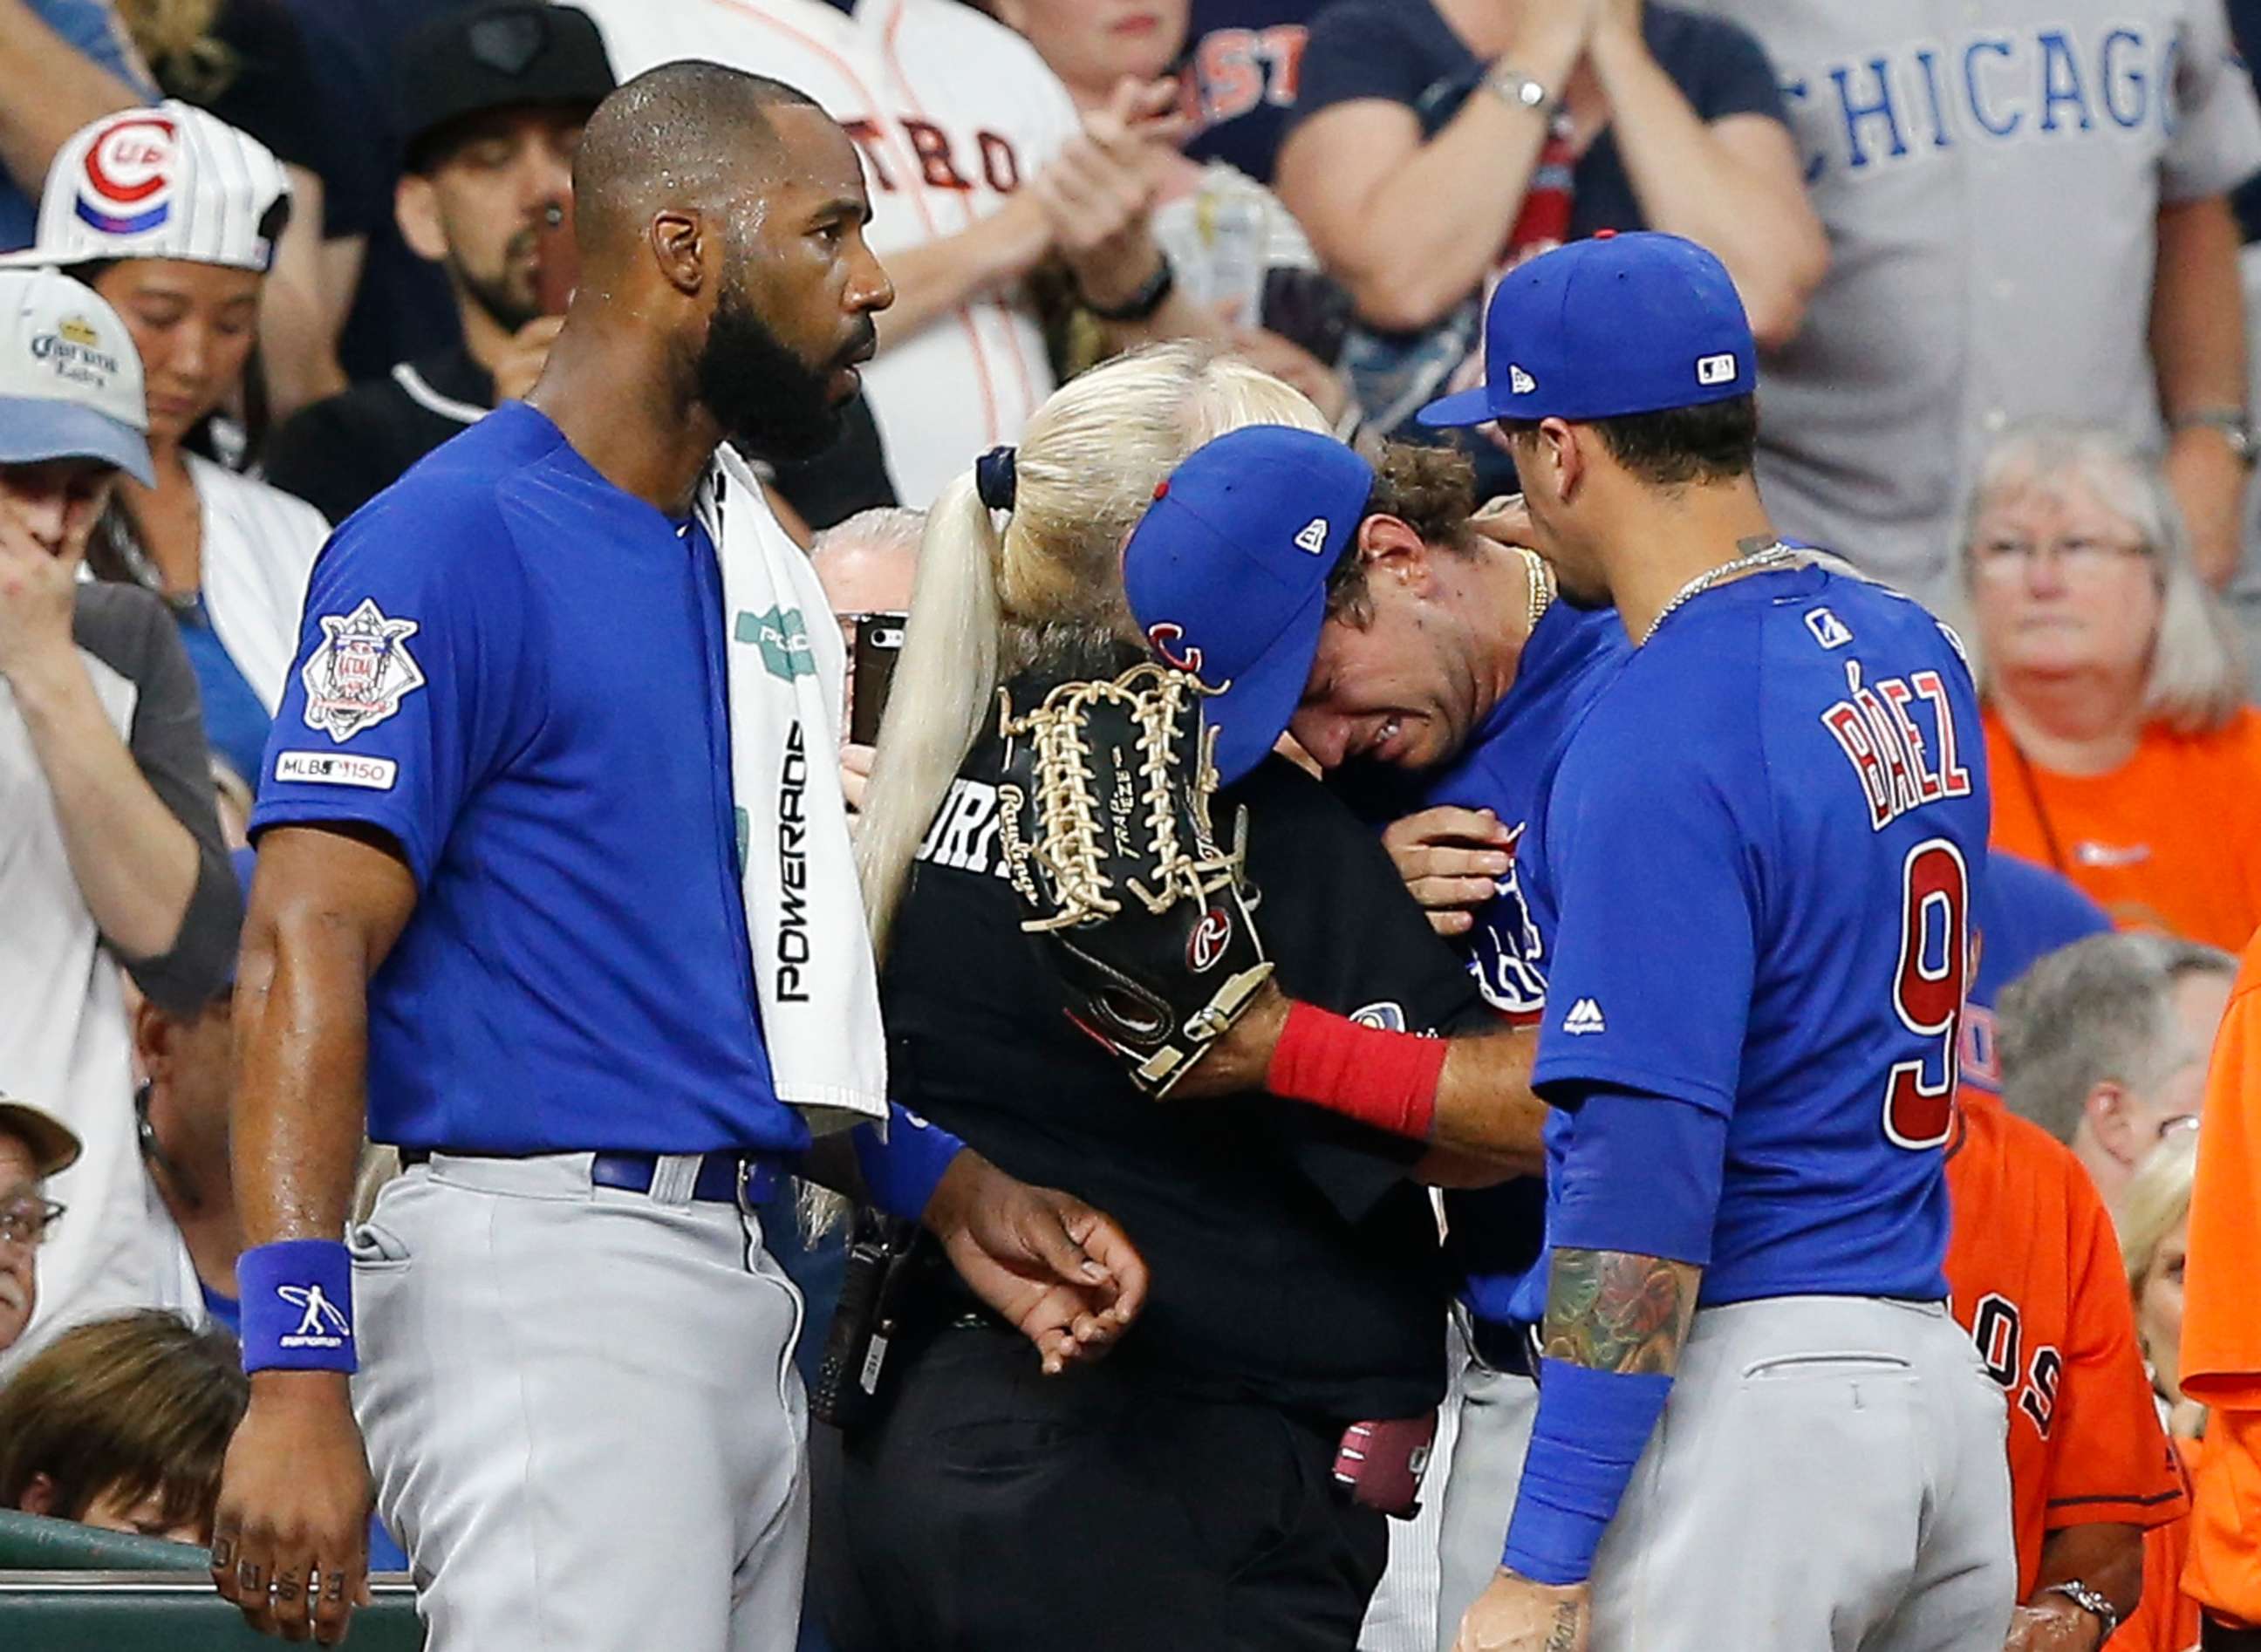 PHOTO: Albert Almora Jr. of the Chicago Cubs, center, is comforted by a security guard after checking on a young child that was struck by a hard foul ball off his bat  at Minute Maid Park on May 29, 2019, in Houston.